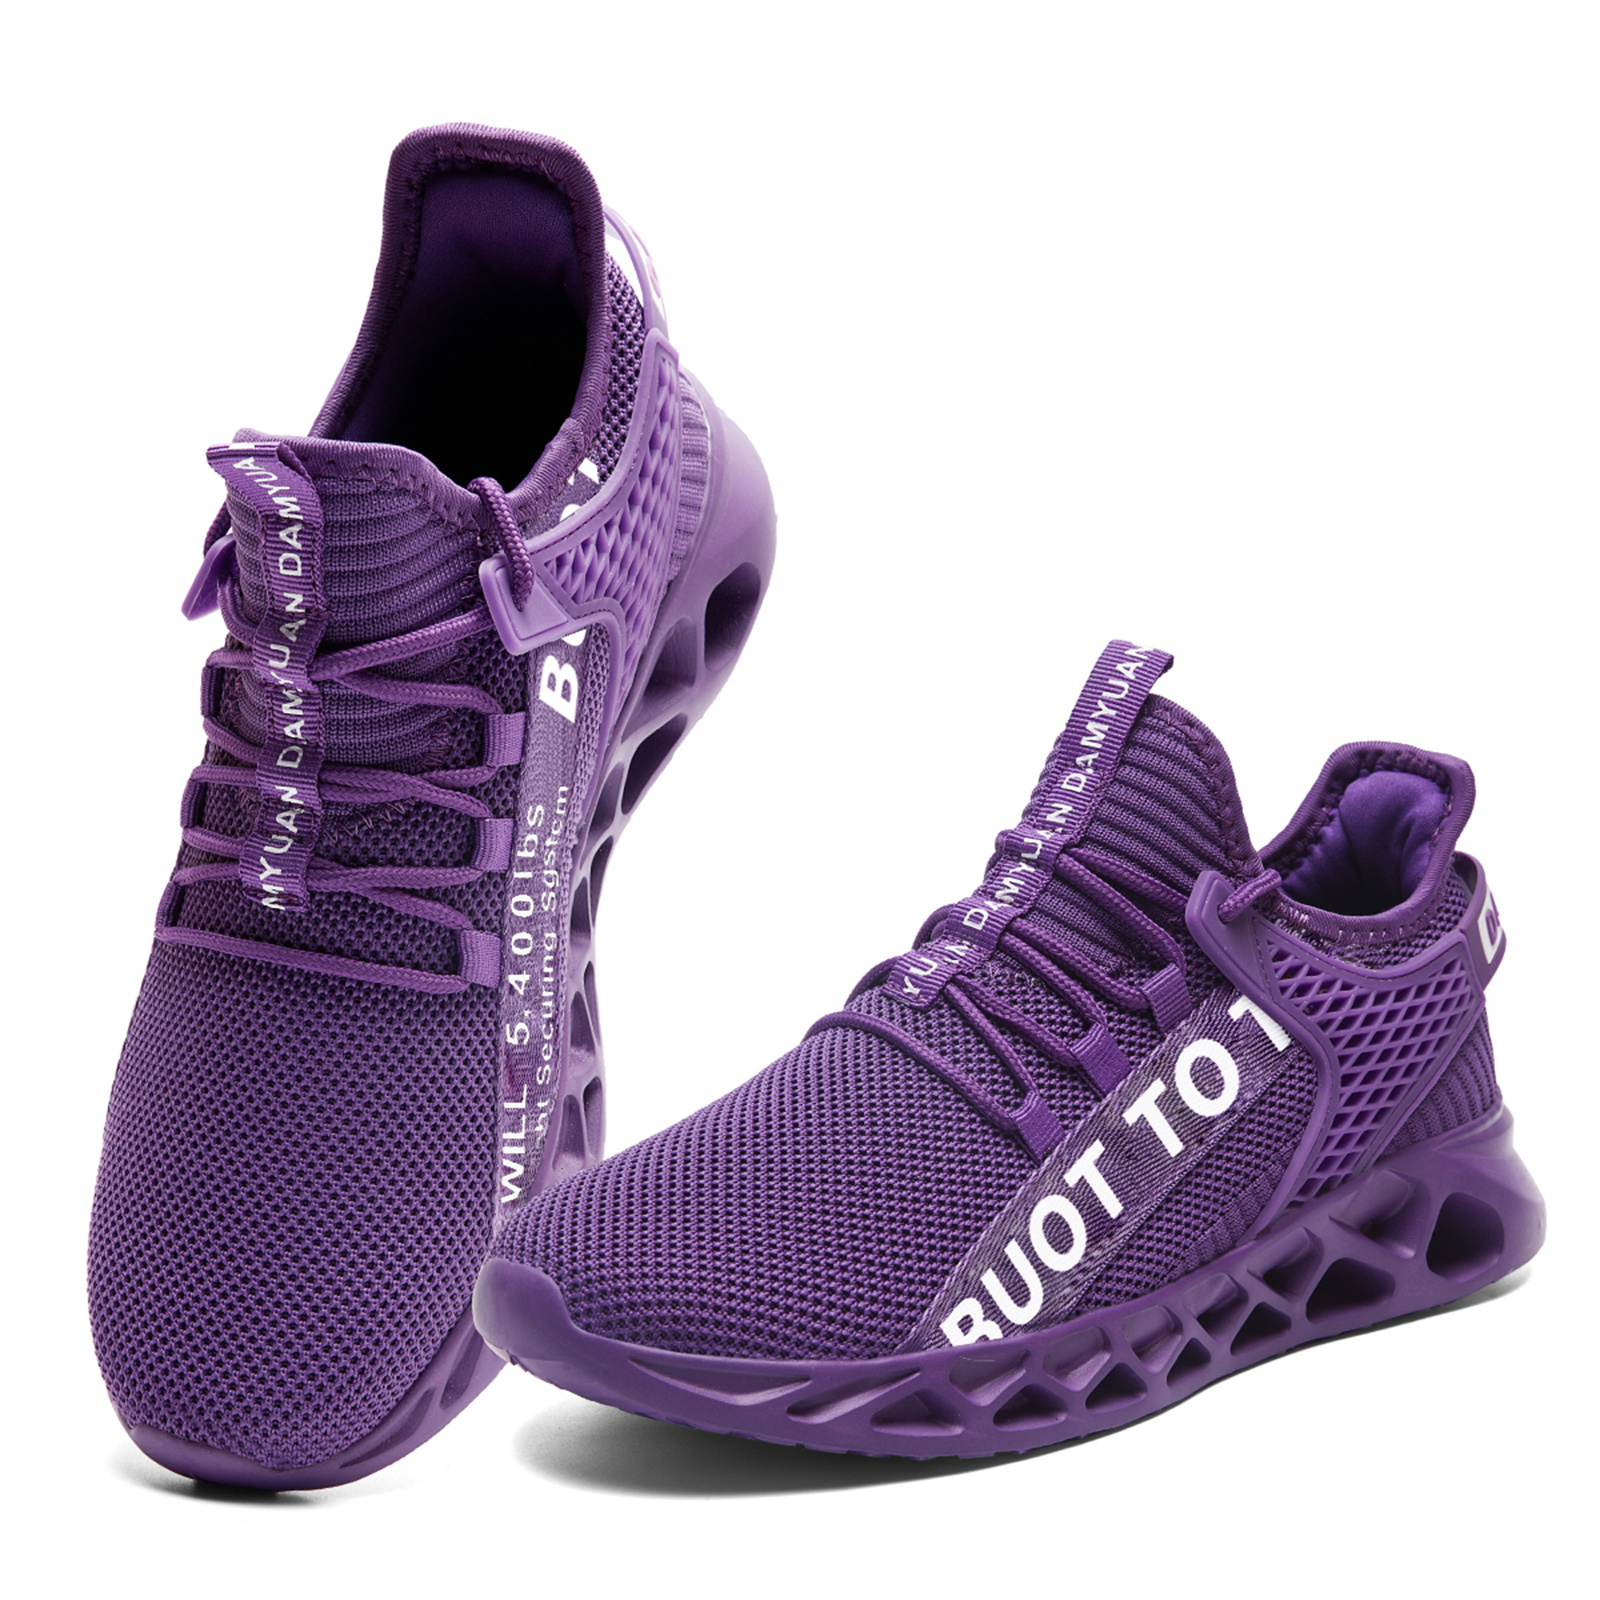 REUR RO RO Women's Sport Running Shoes Low Top Walking Shoes Lace-Up ...